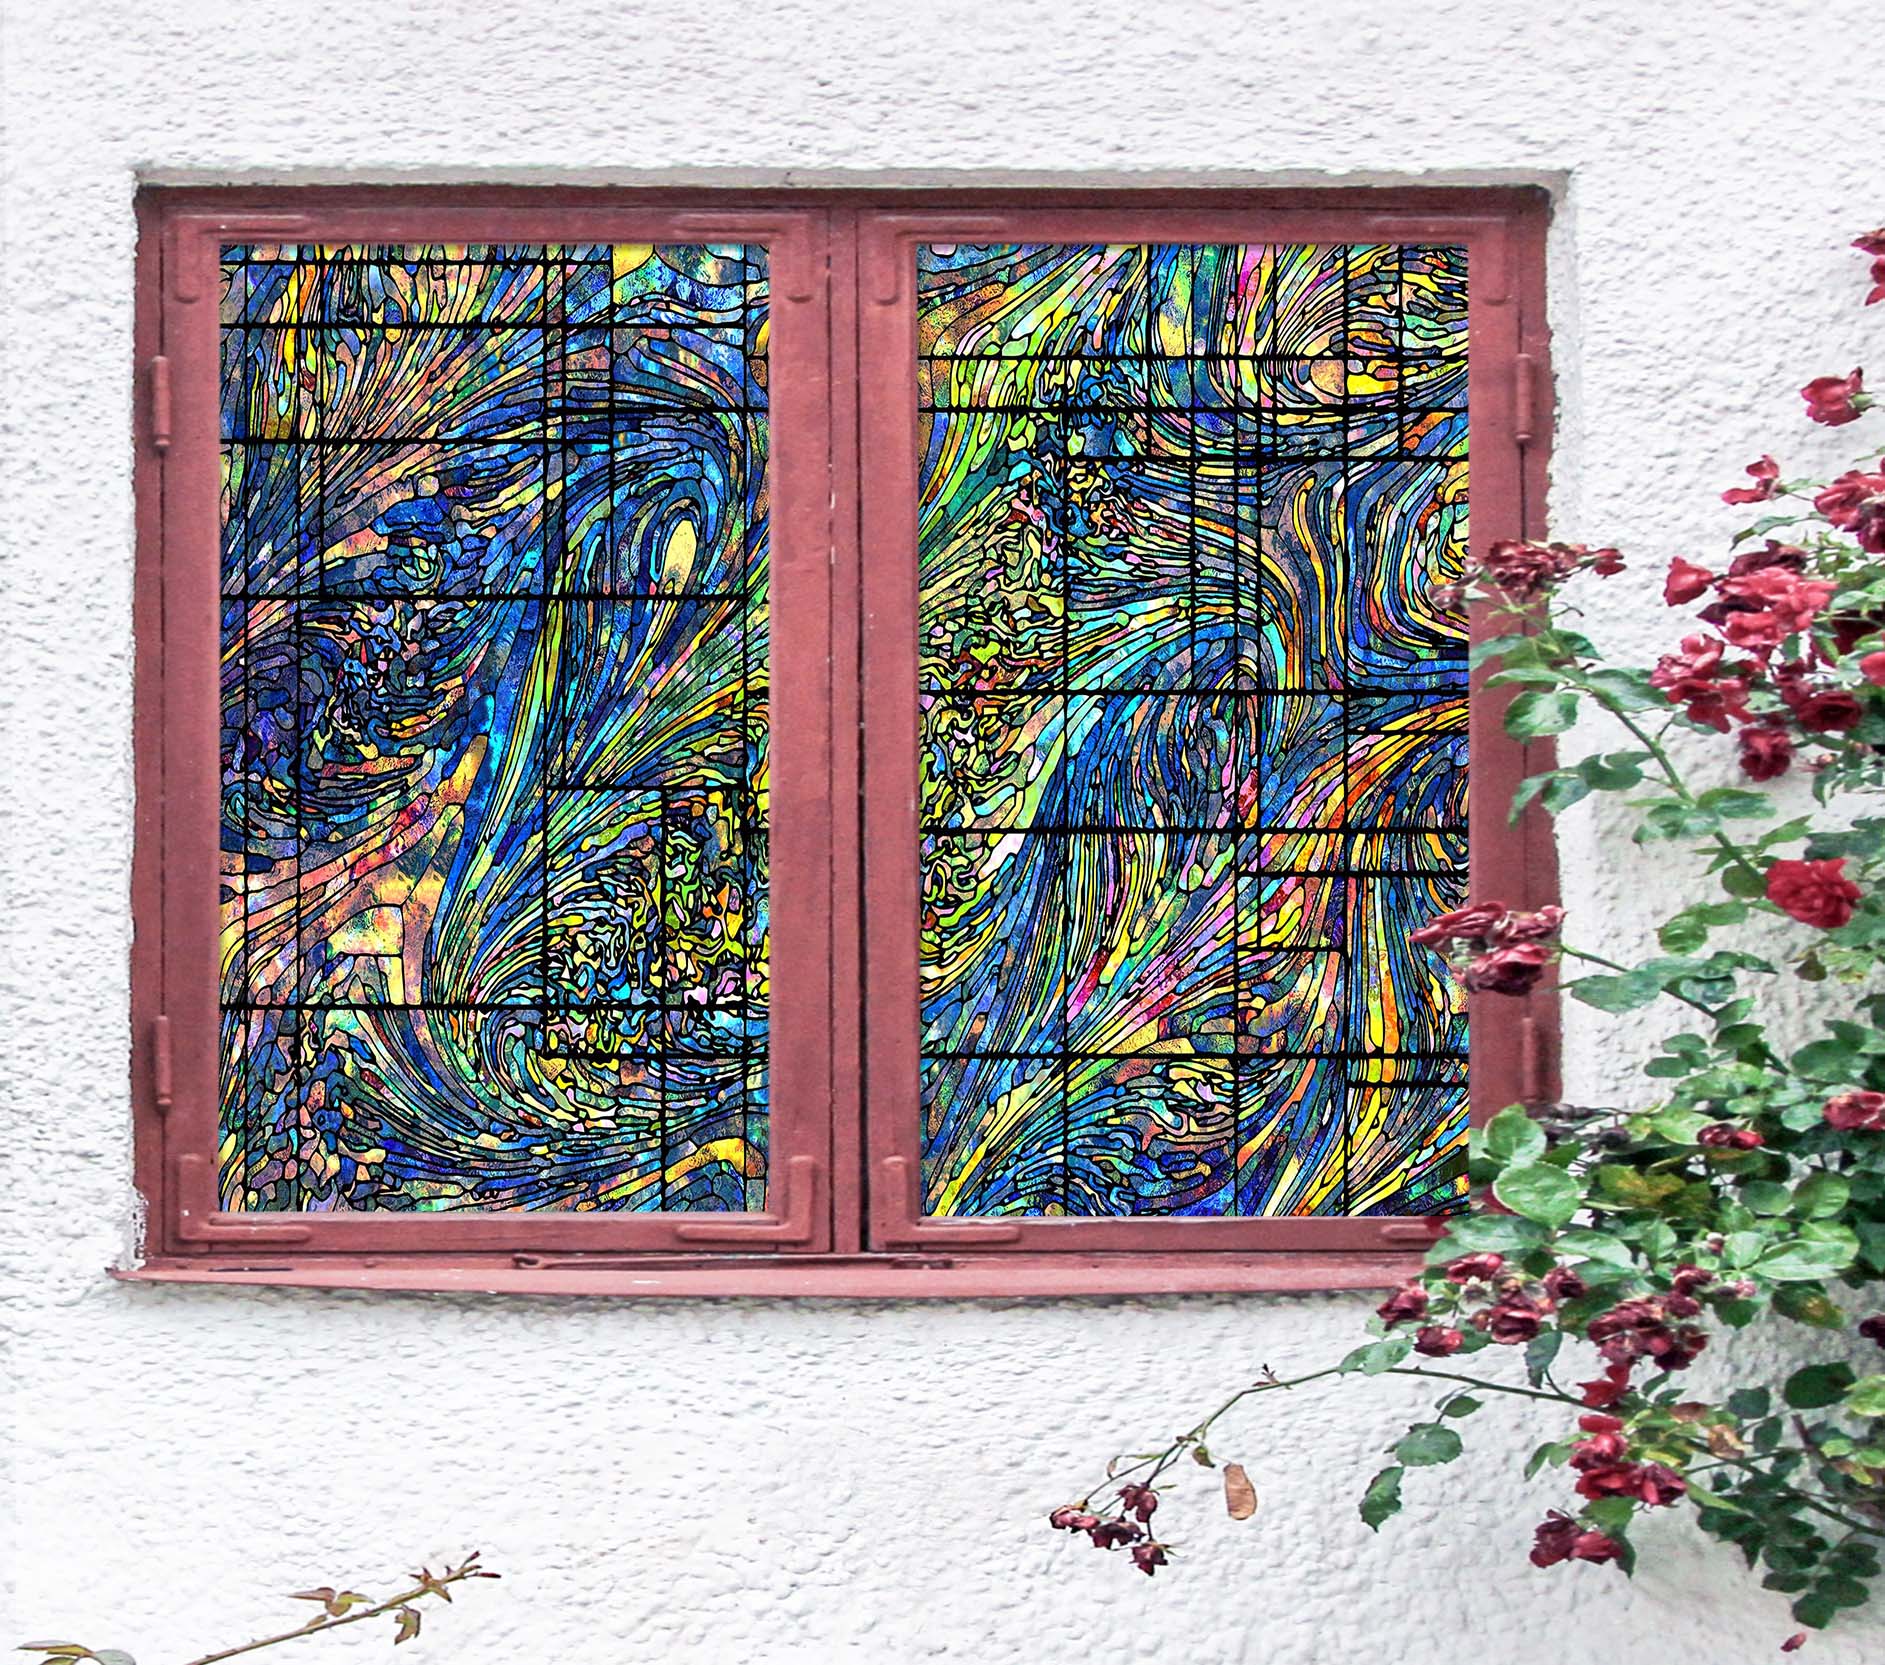 3D Square Abstraction 040 Window Film Print Sticker Cling Stained Glass UV Block